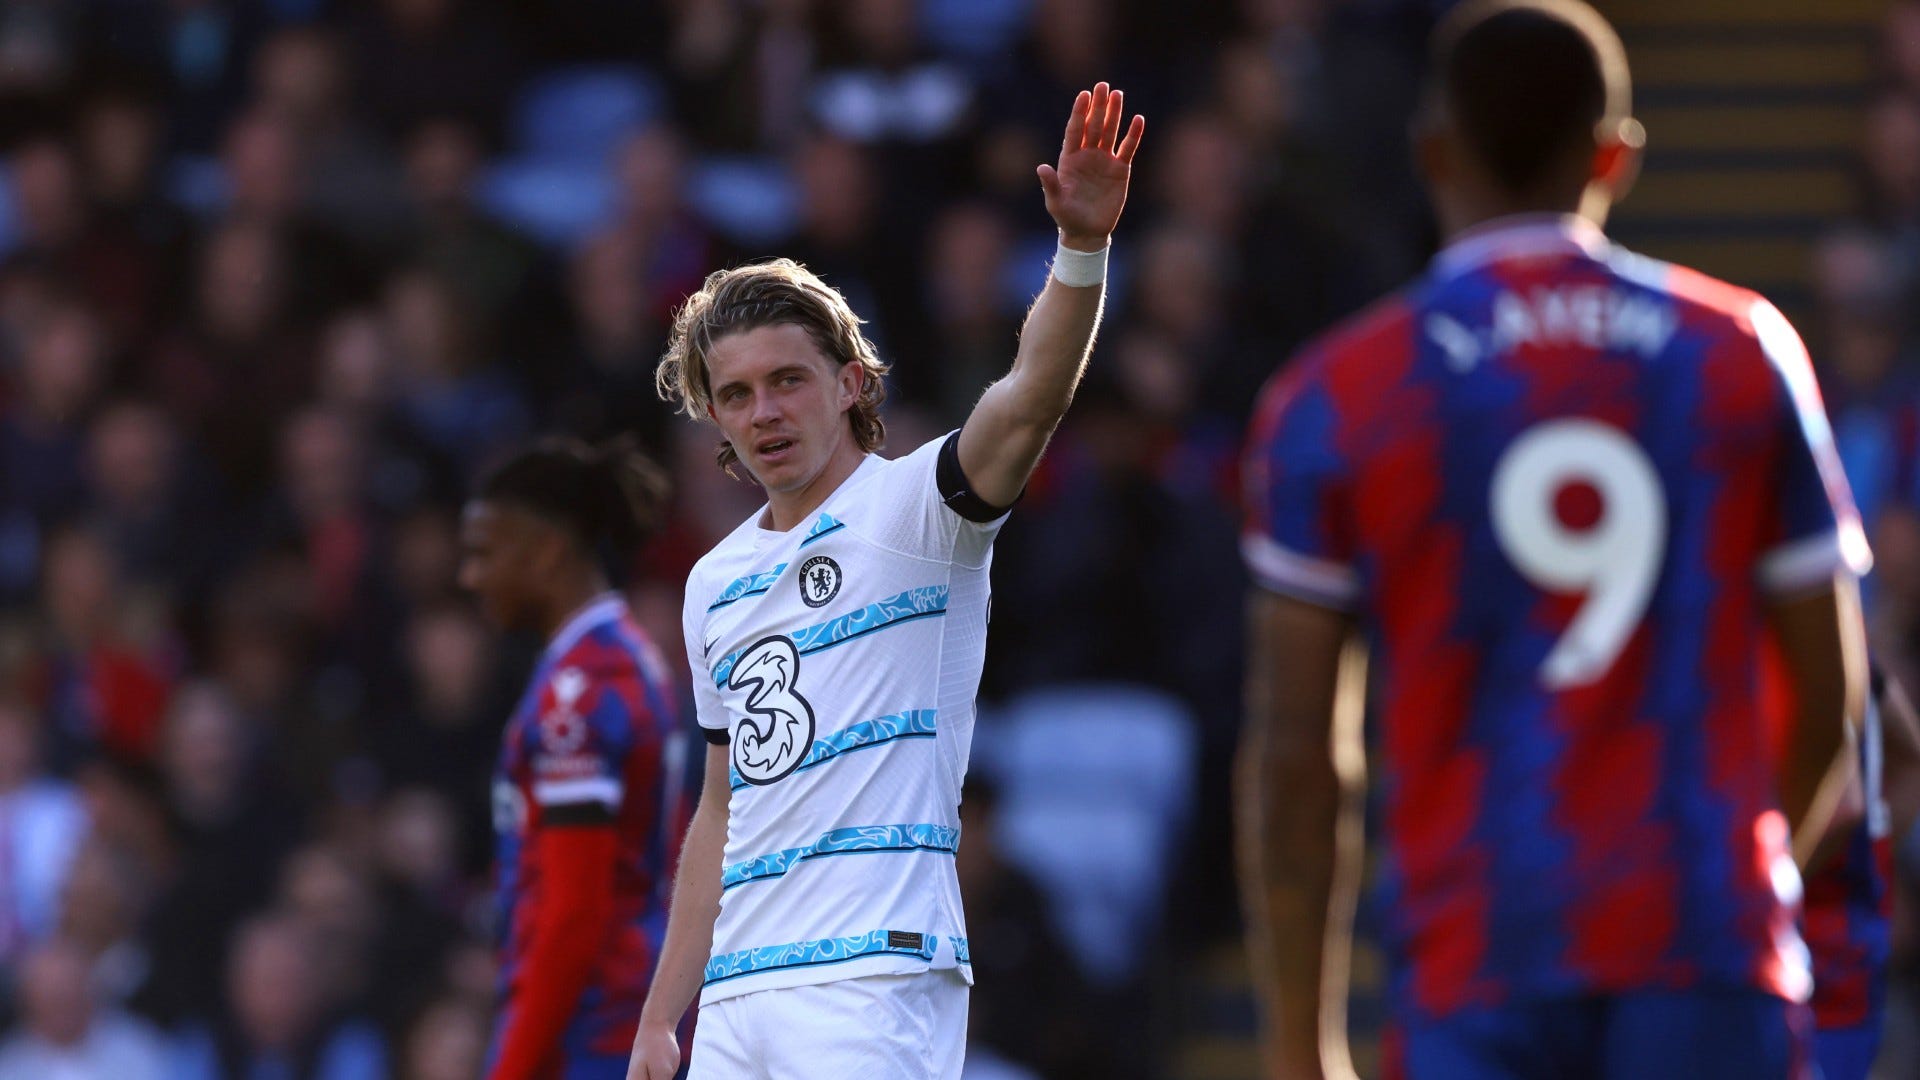 'Written in the stars!' - Gallagher overjoyed by first Chelsea goal after scoring stunner against former club Crystal Palace | Goal.com UK